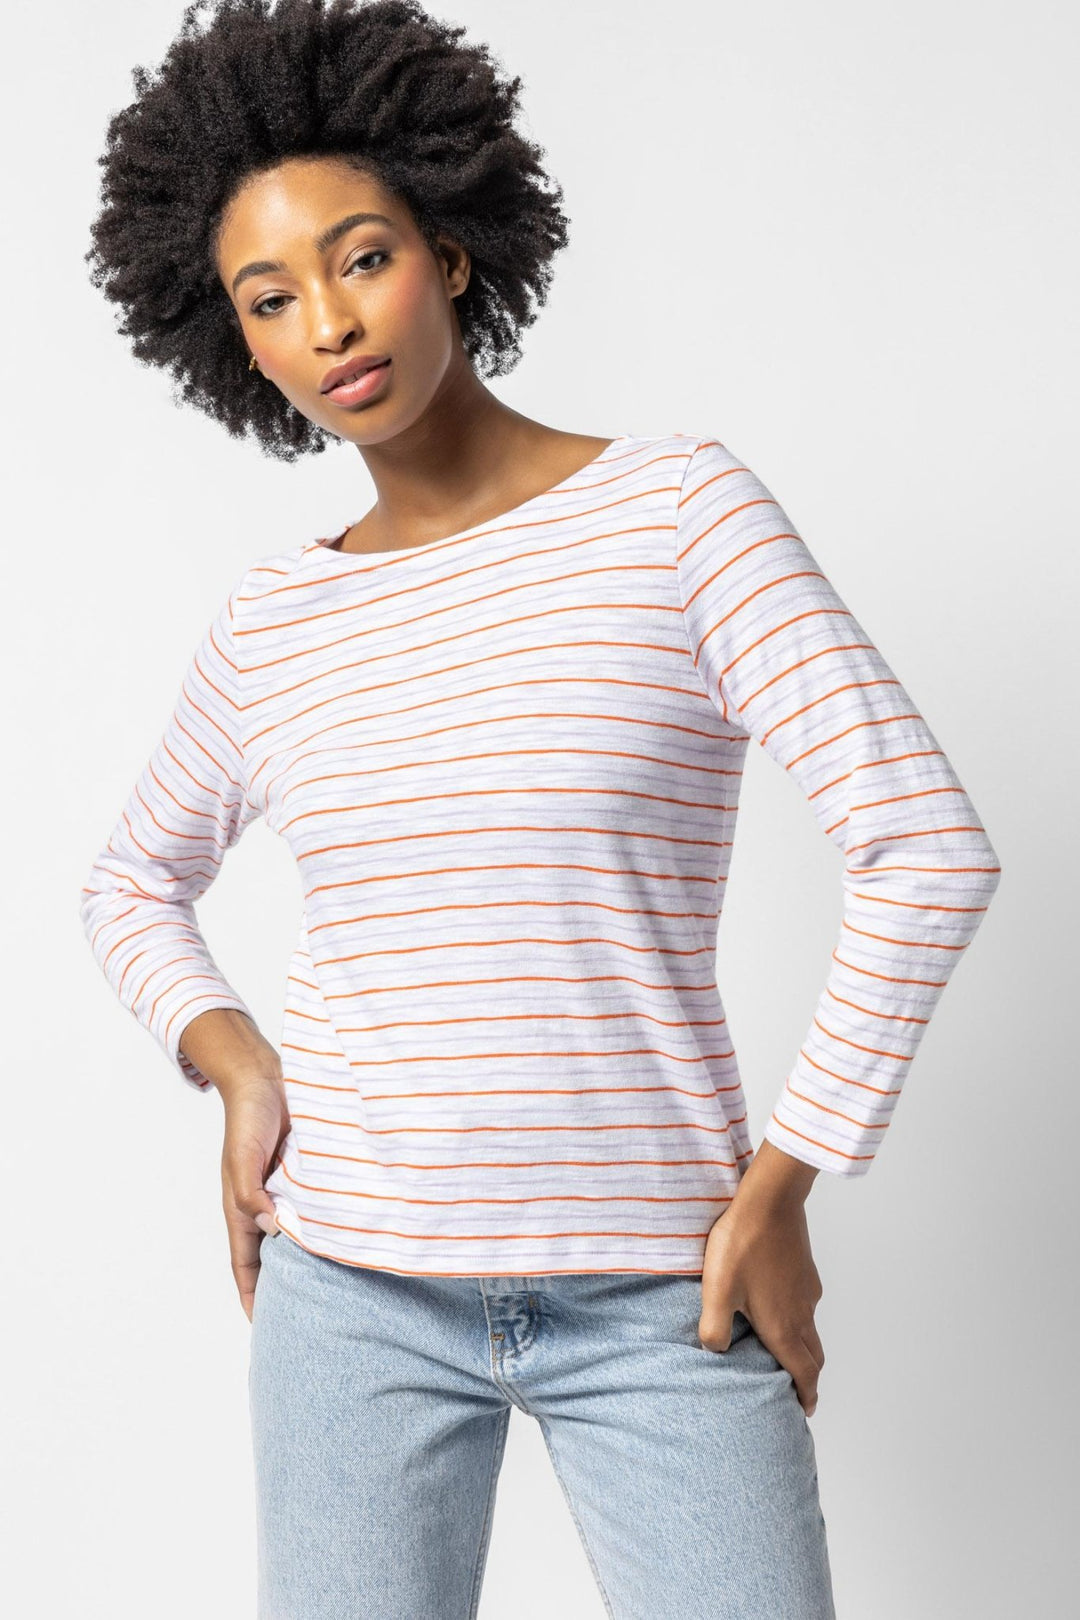 Lilla P - 3/4 Sleeve Striped Boatneck: Tangelo/Lily - Shorely Chic Boutique